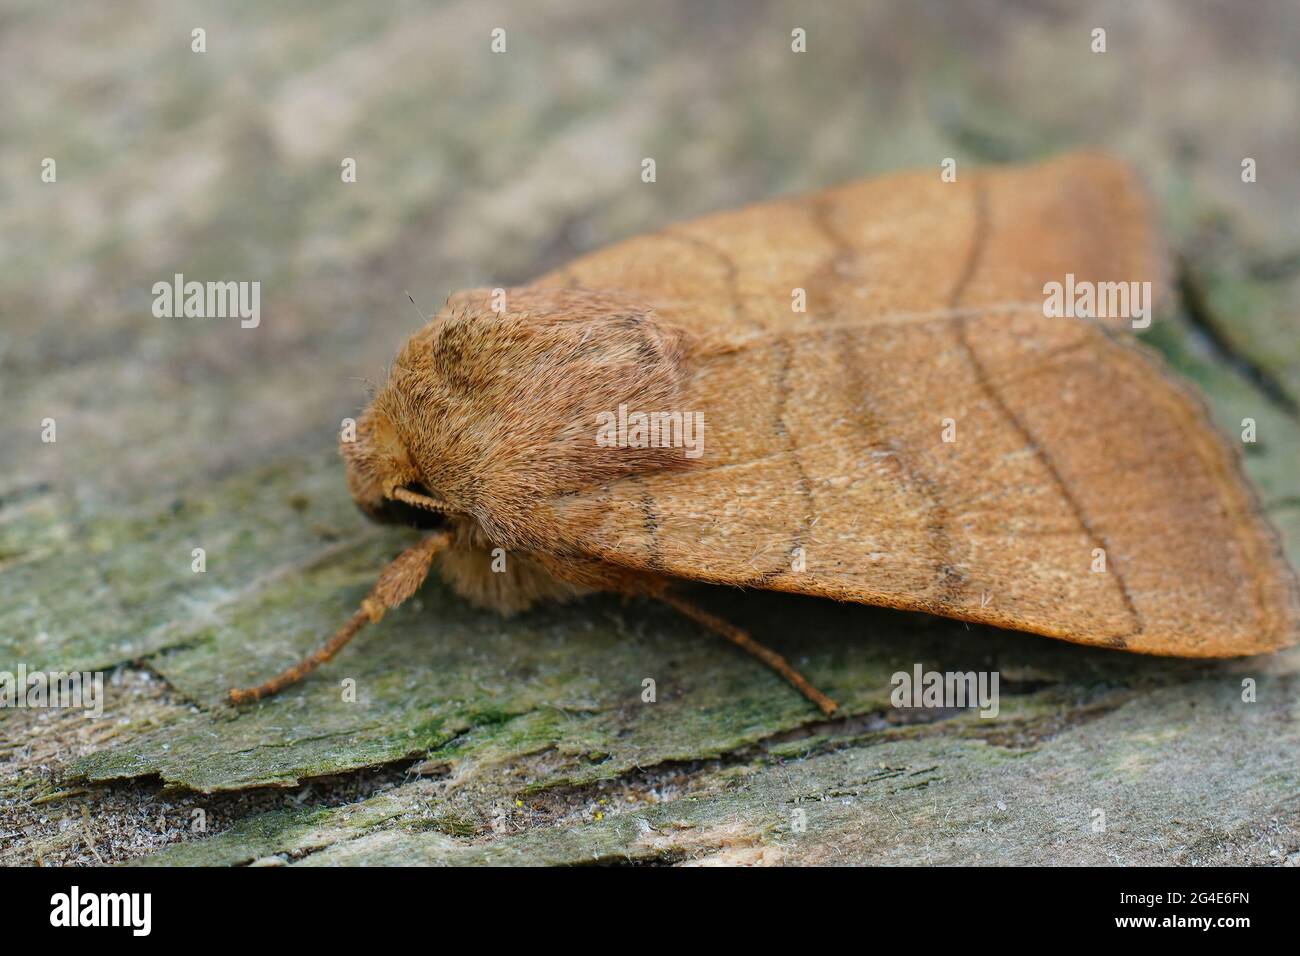 Closeup shot of a treble lines moth on the surface of a wood Stock Photo